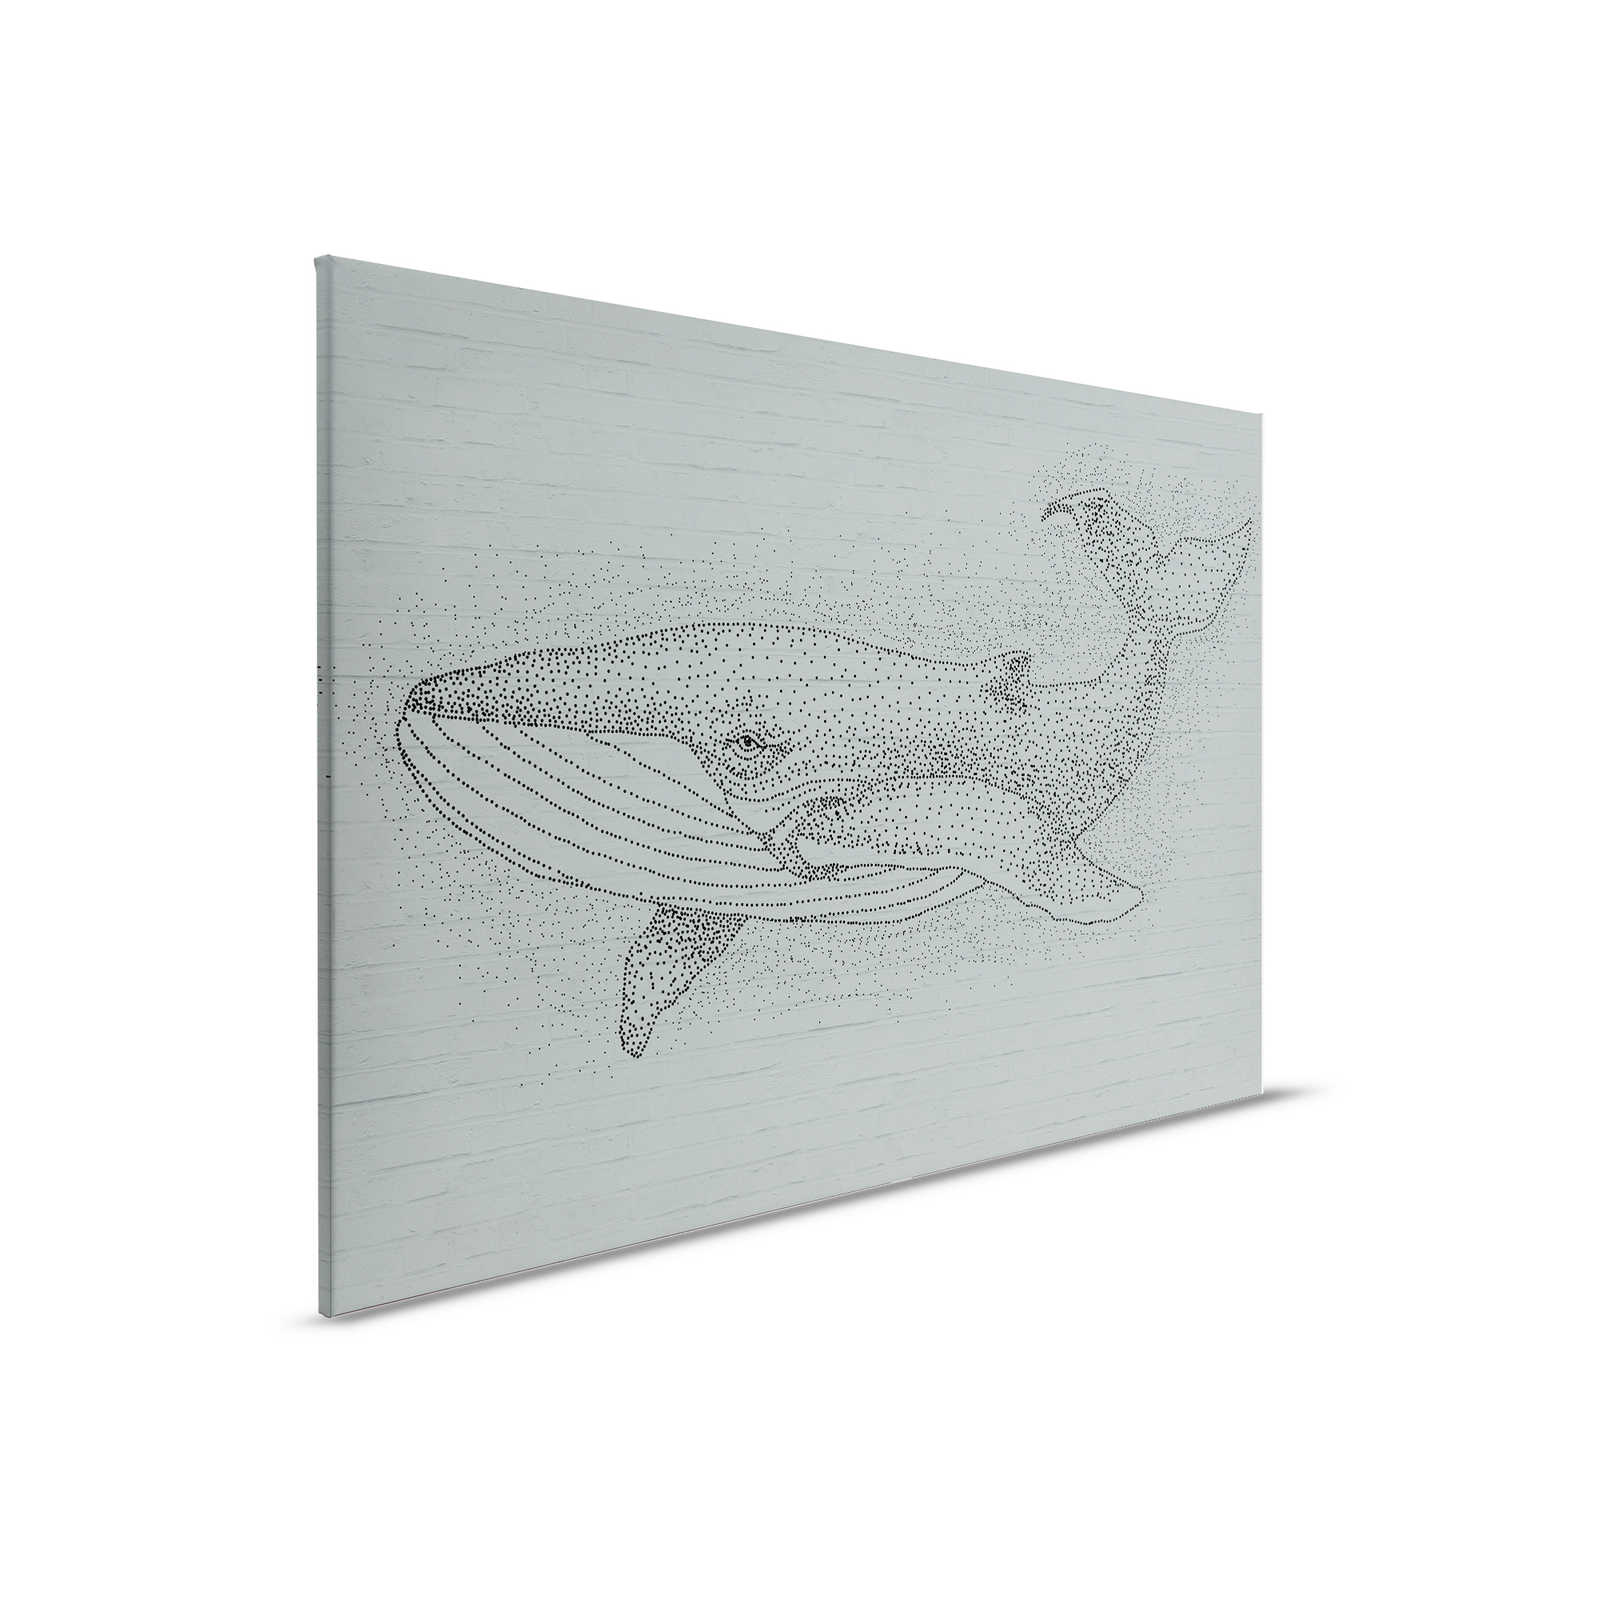 Stone Wall Canvas Painting with Whale Motif in Drawing Style - 0.90 m x 0.60 m
